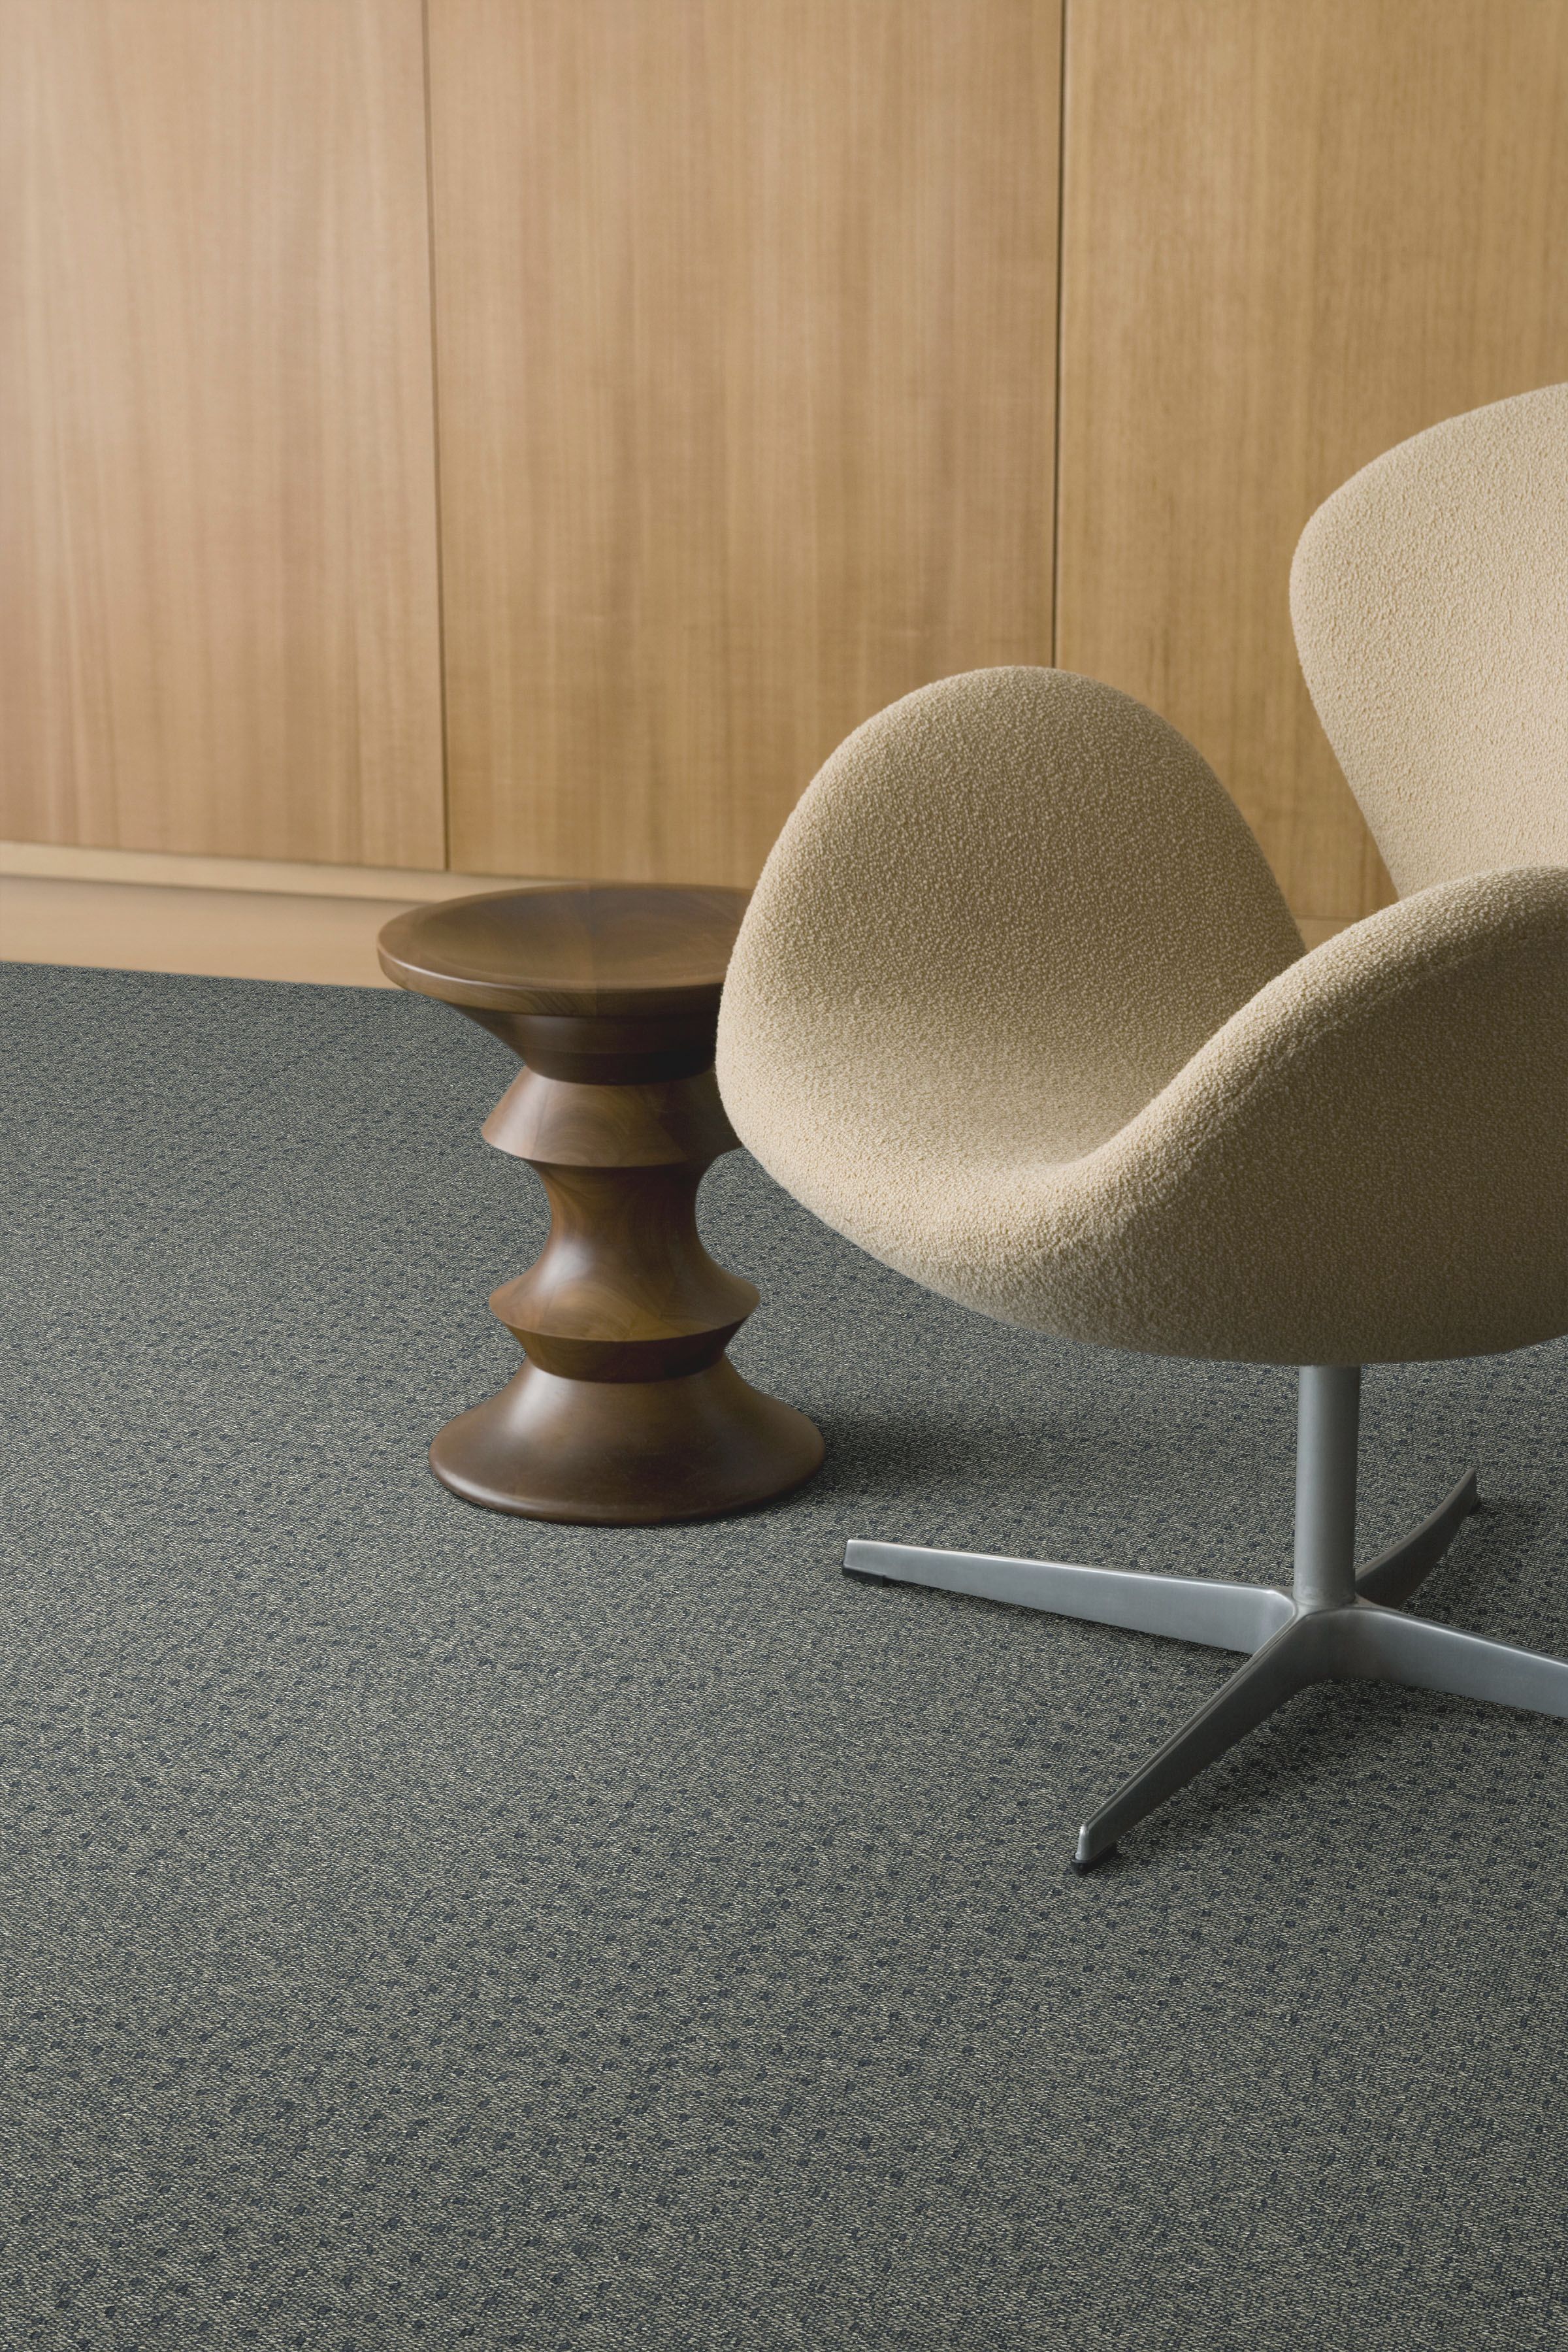 Interface Dover Street carpet tile close up with chair and small side table afbeeldingnummer 6